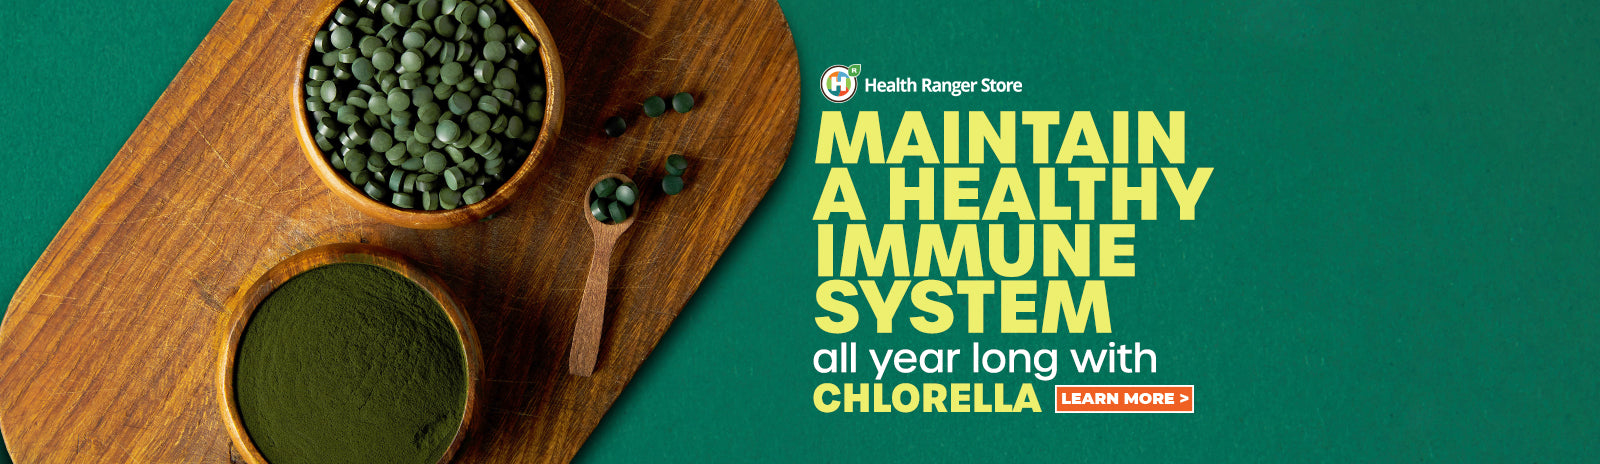 Maintain a healthy immune system all year long with chlorella